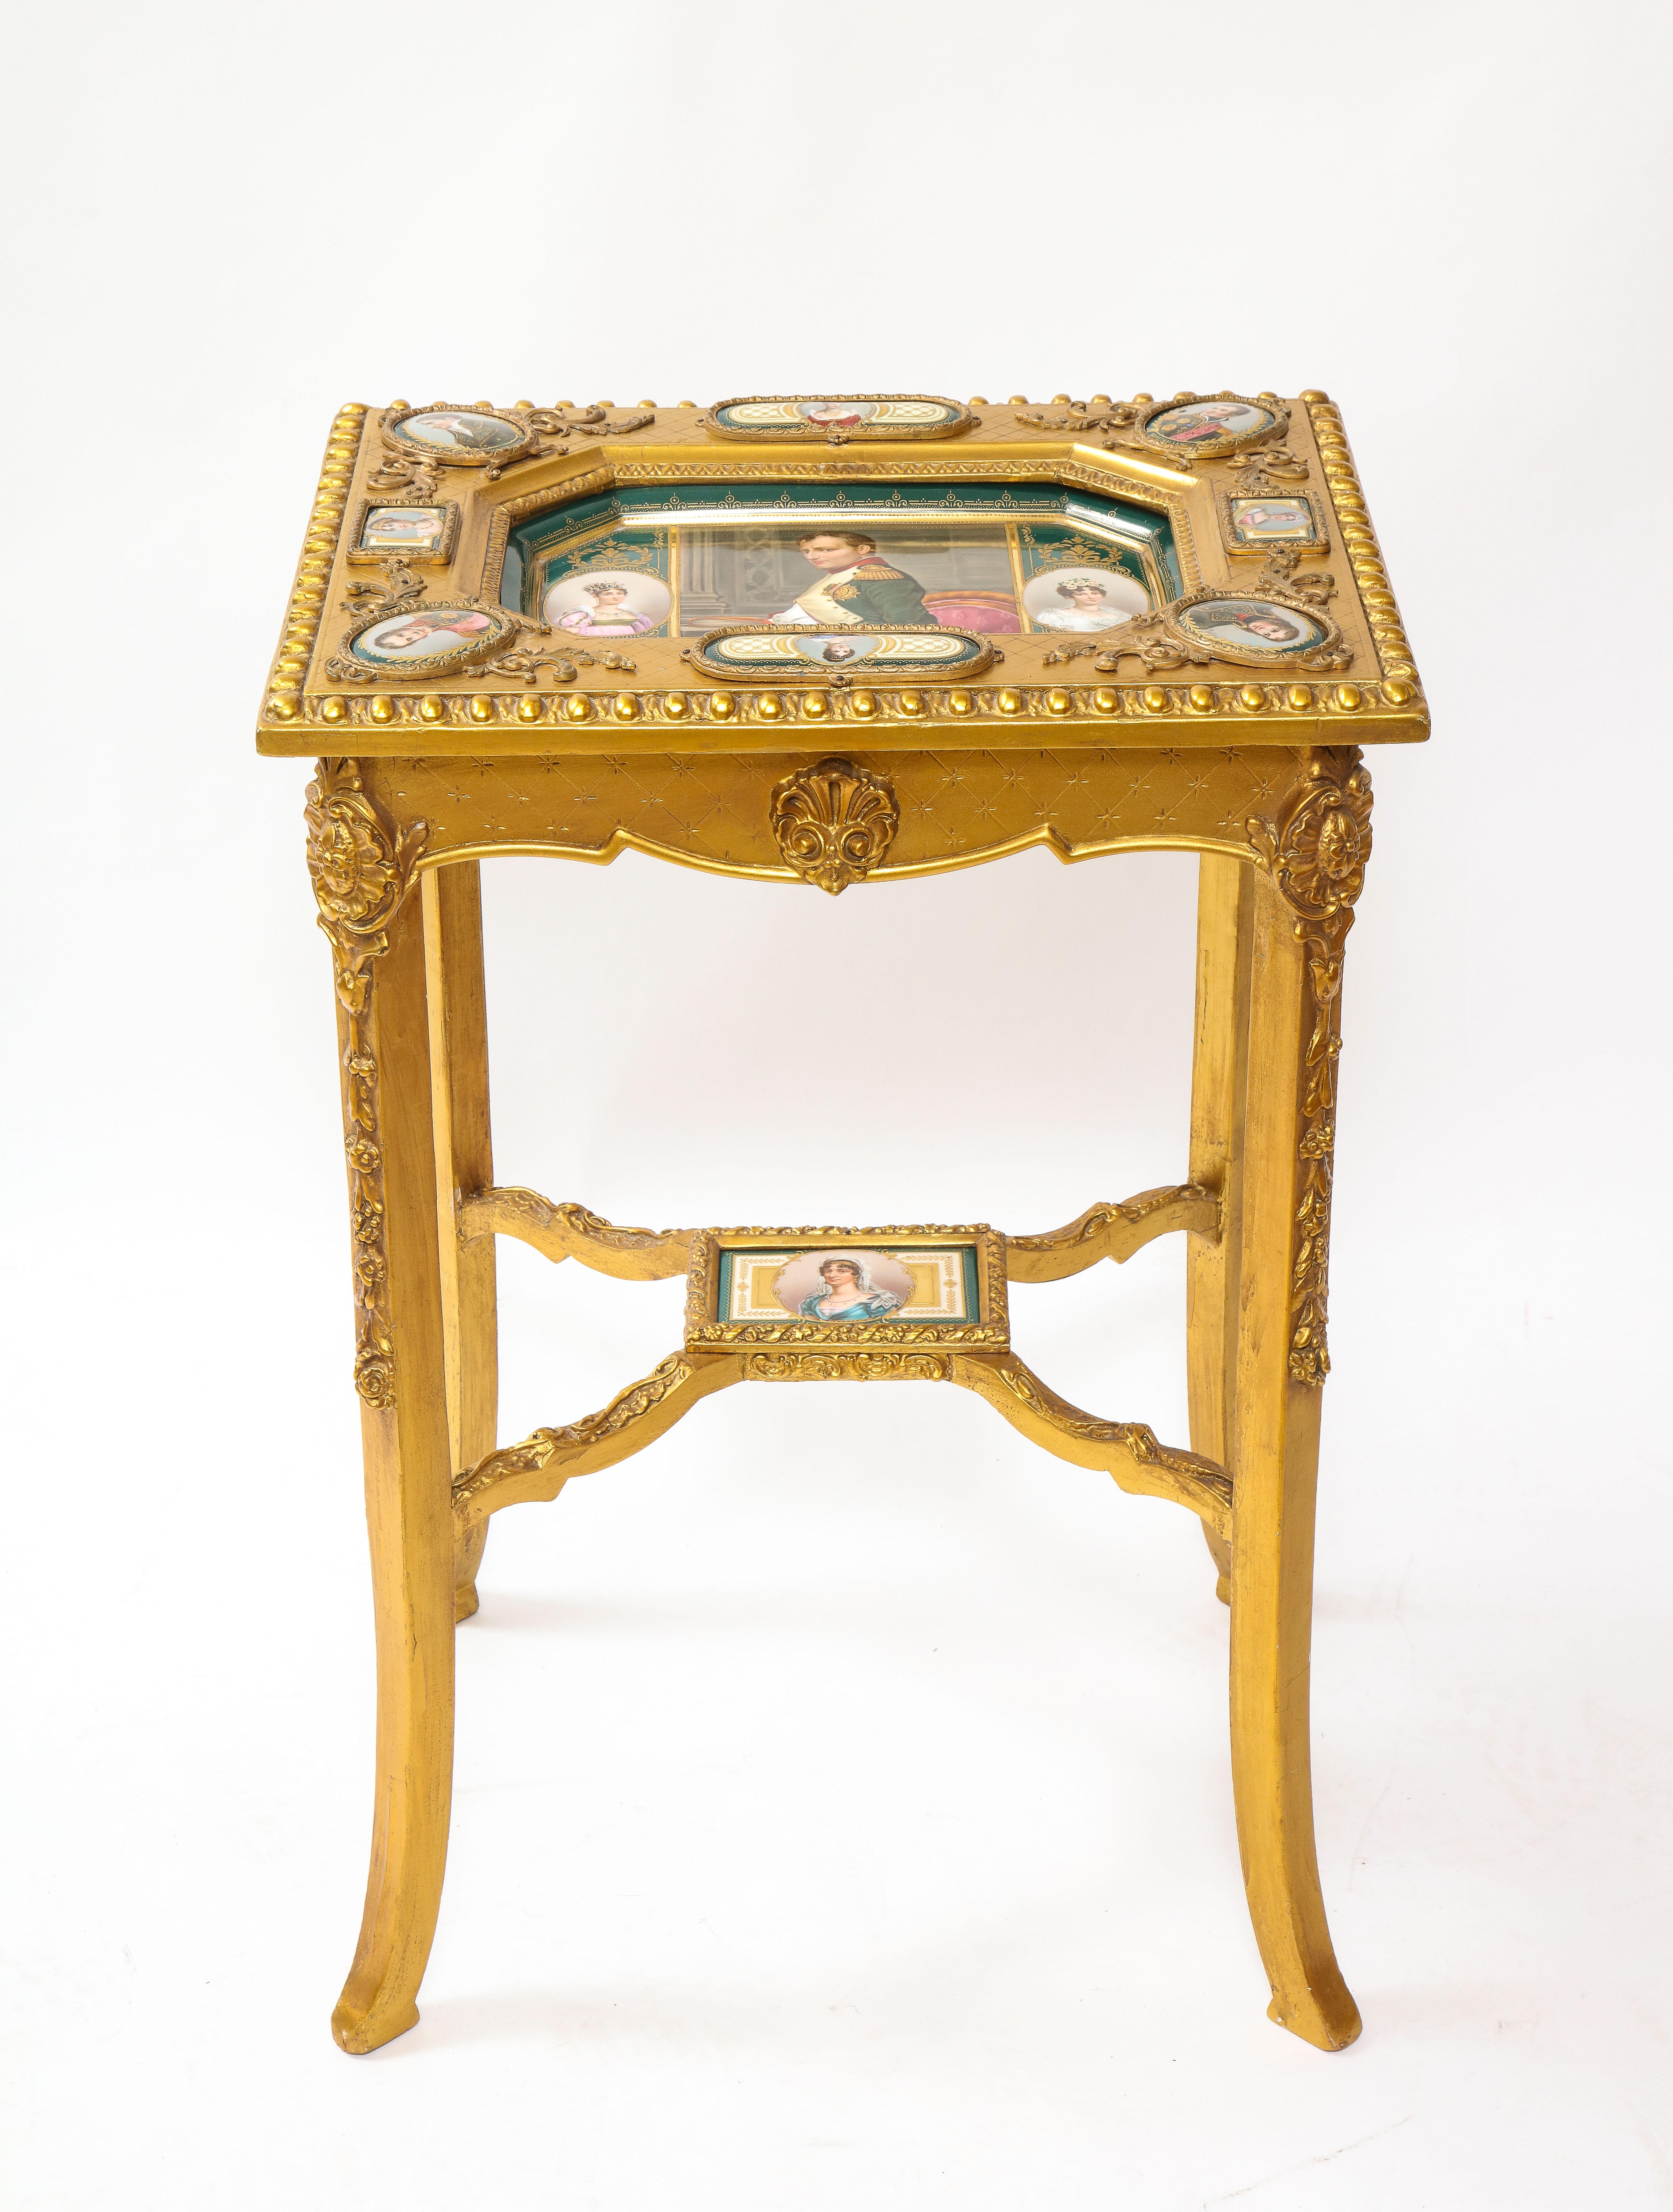 Austrian 19th C. Napoleonic Royal Vienna Giltwood Side Table w/ Inlaid Porcelain Plaques For Sale